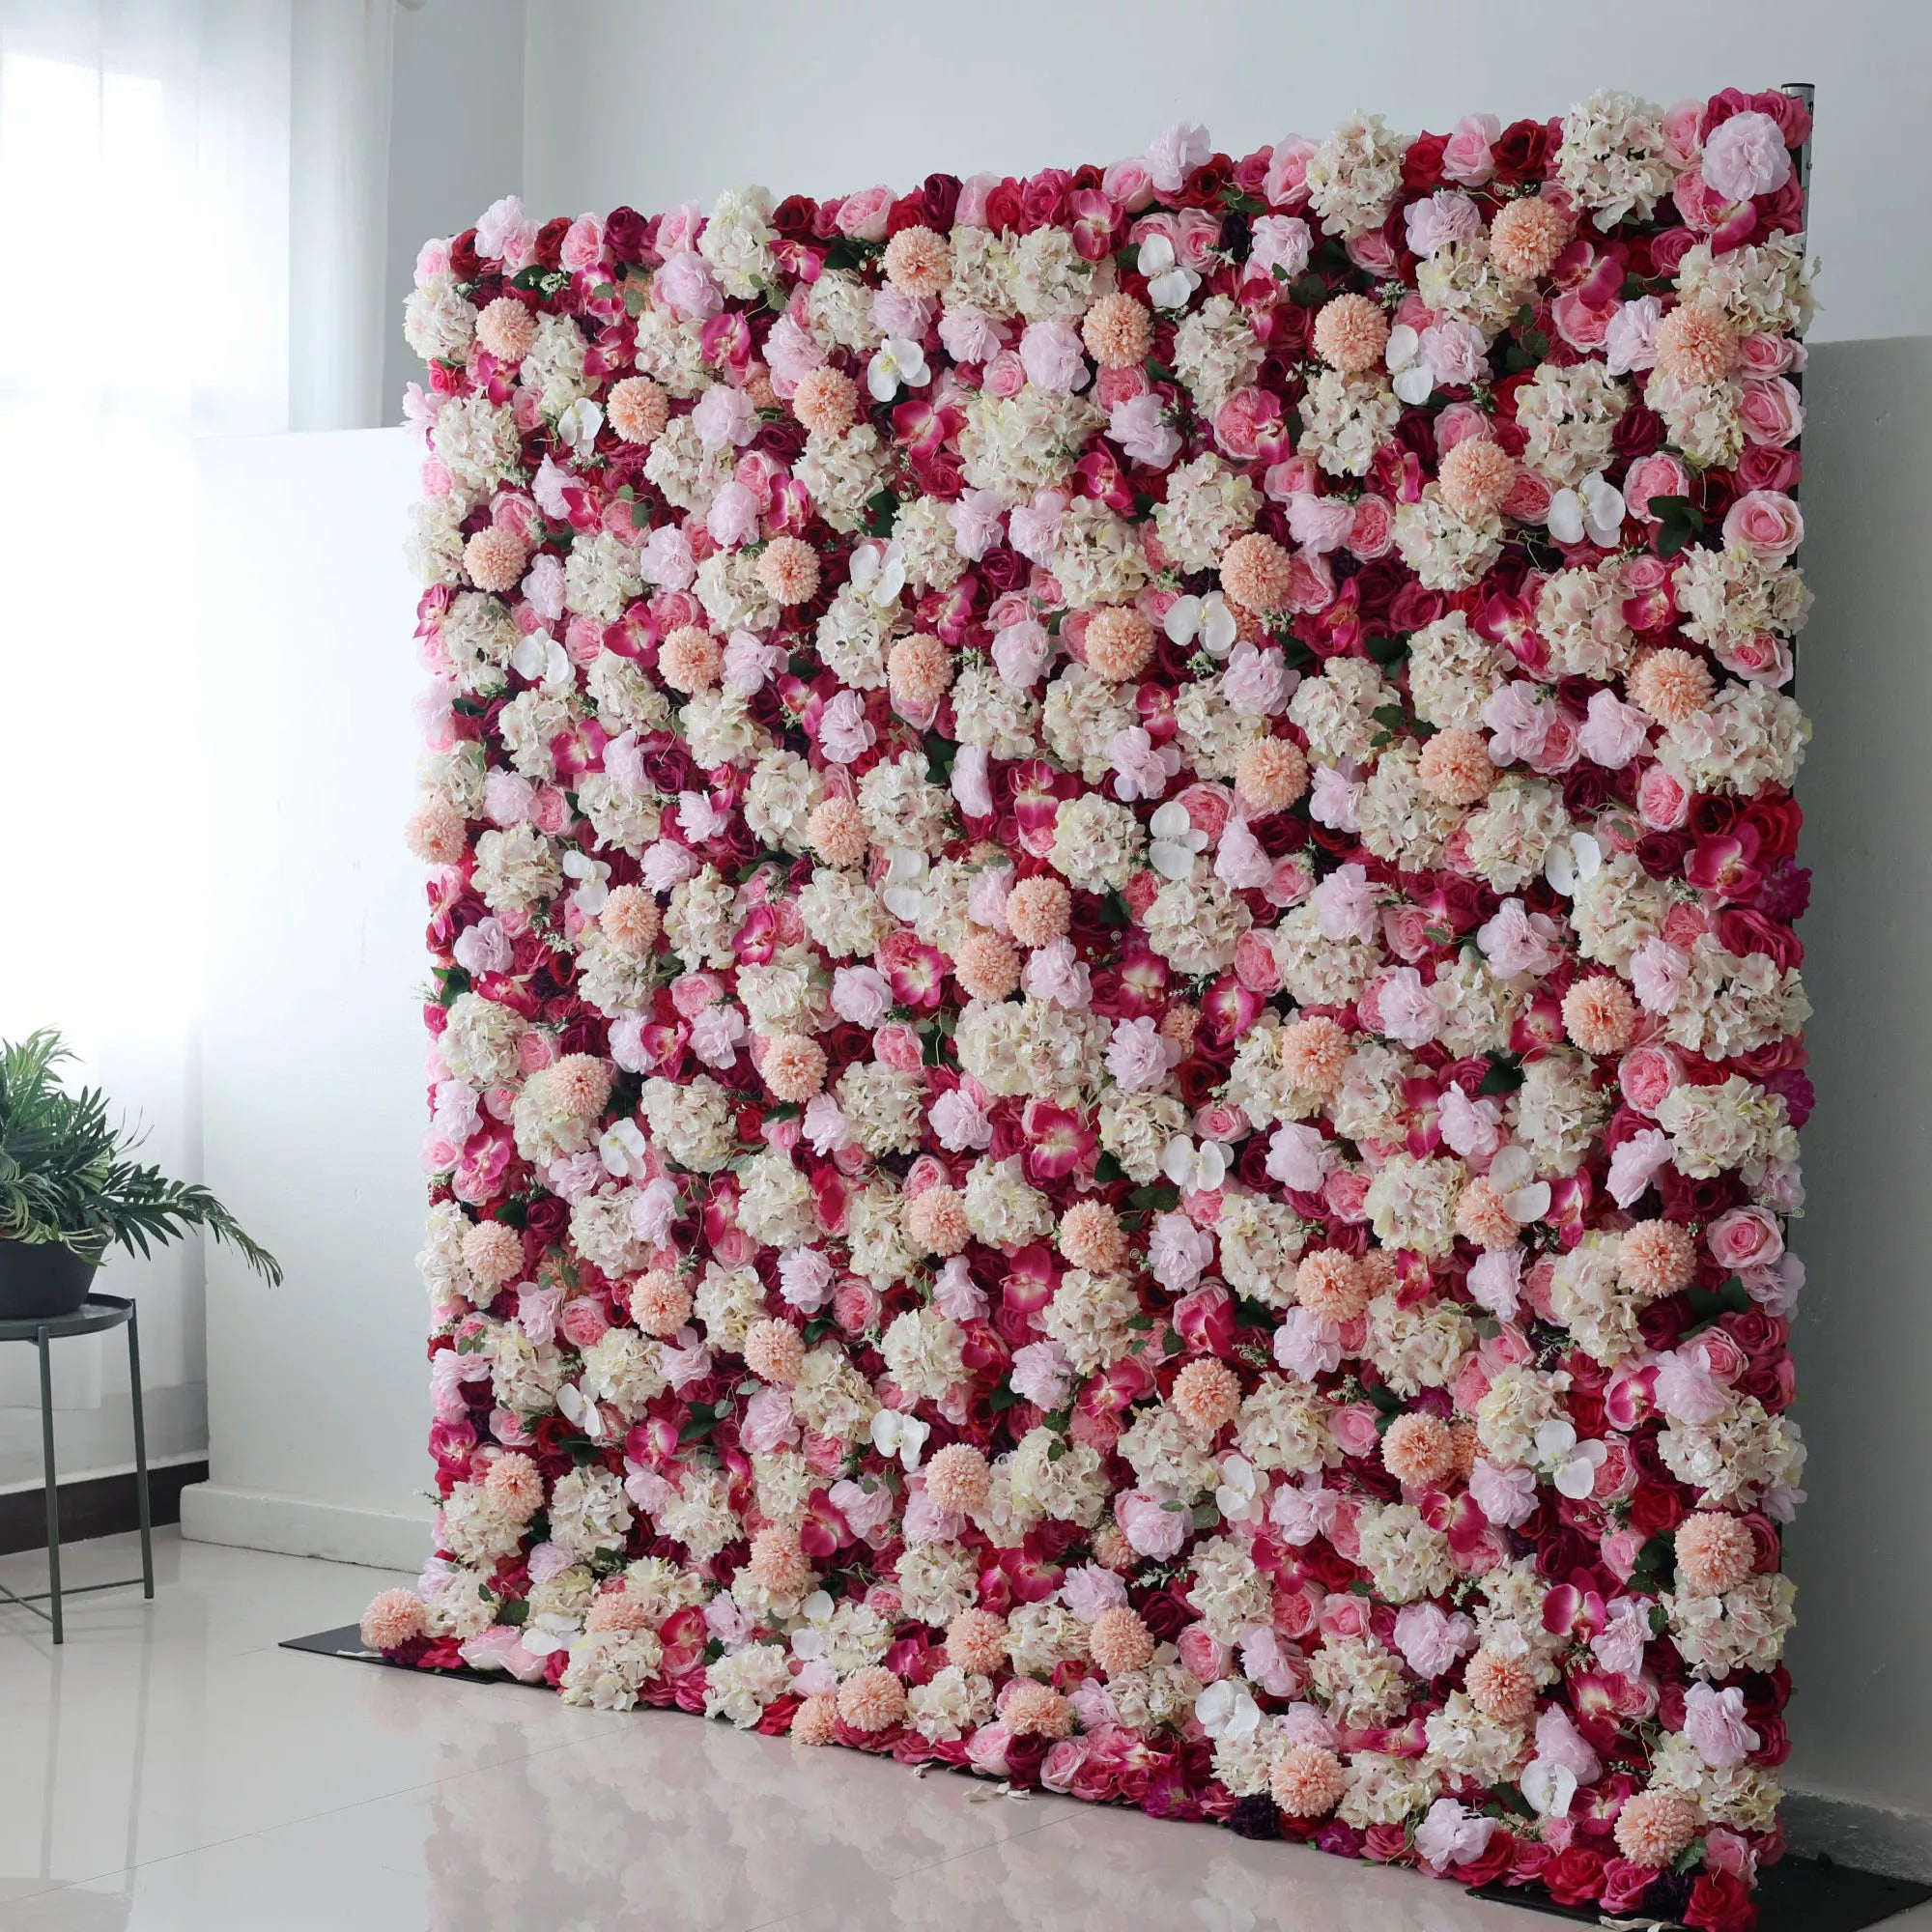 Valar Flowers Roll Up Backdrop: Immerse in the Roseate Radiance of blushing blooms. Ideal for romantic settings and elegant events, this backdrop weaves tenderness with timeless elegance. Bask in Valar's blossoming beauty.